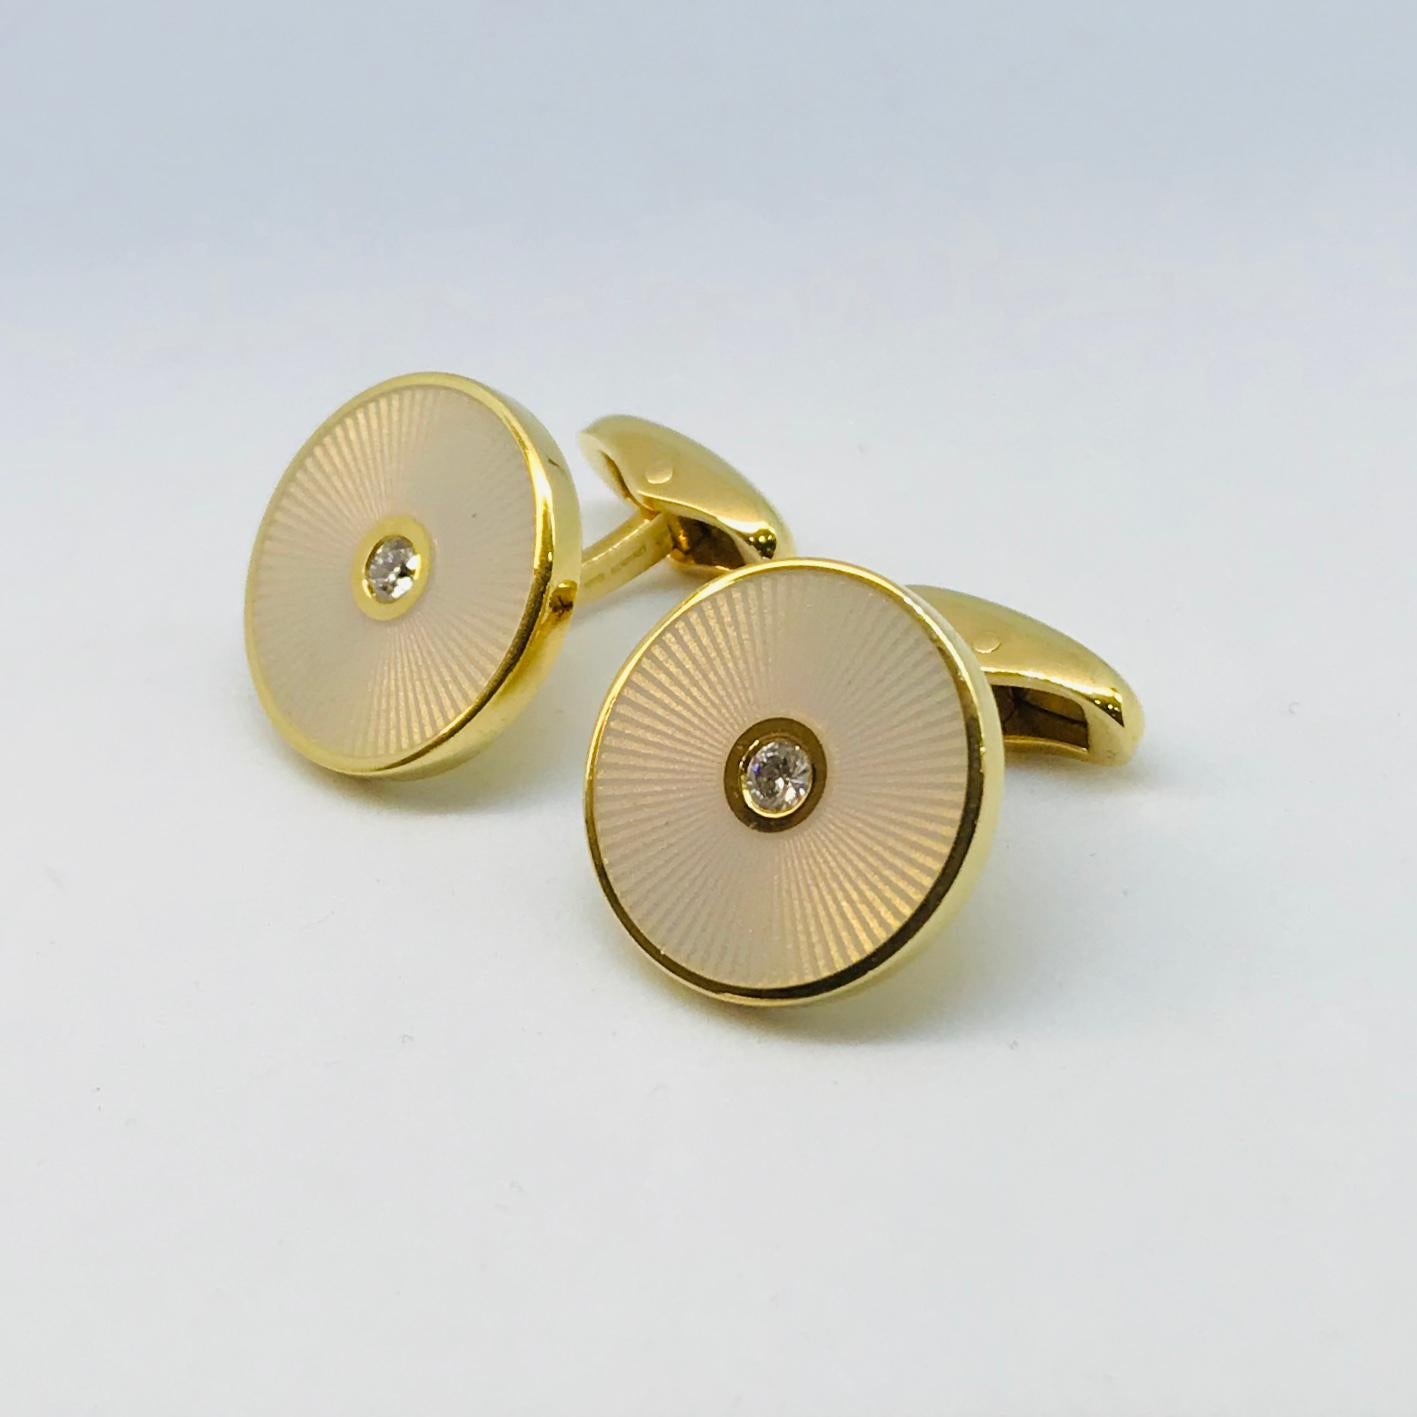 One pair of Fabergé limited edition 18K Yellow Gold Opalescent White French Guilloché enamel and diamond Round shaped cufflinks. Each cufflink centers one bezel-set round brilliant cut diamond surrounded by the translucent enameled “sun-ray” pattern